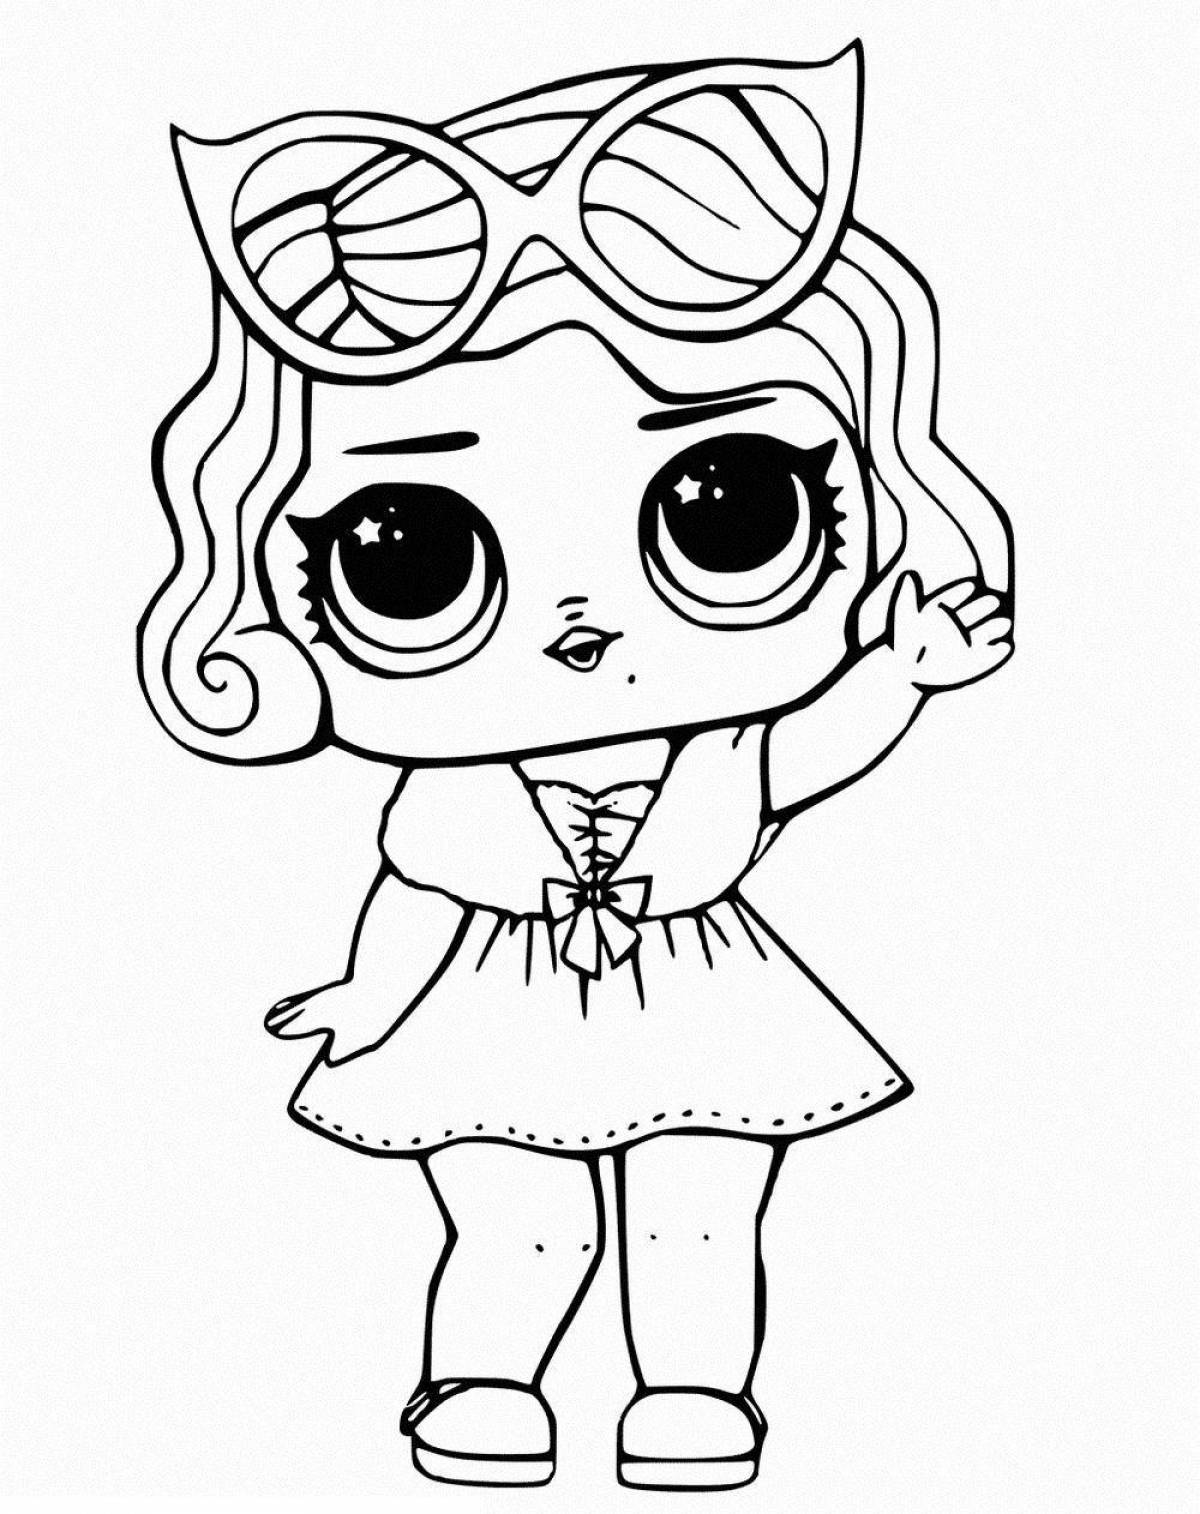 Adorable coloring book for lol dolls